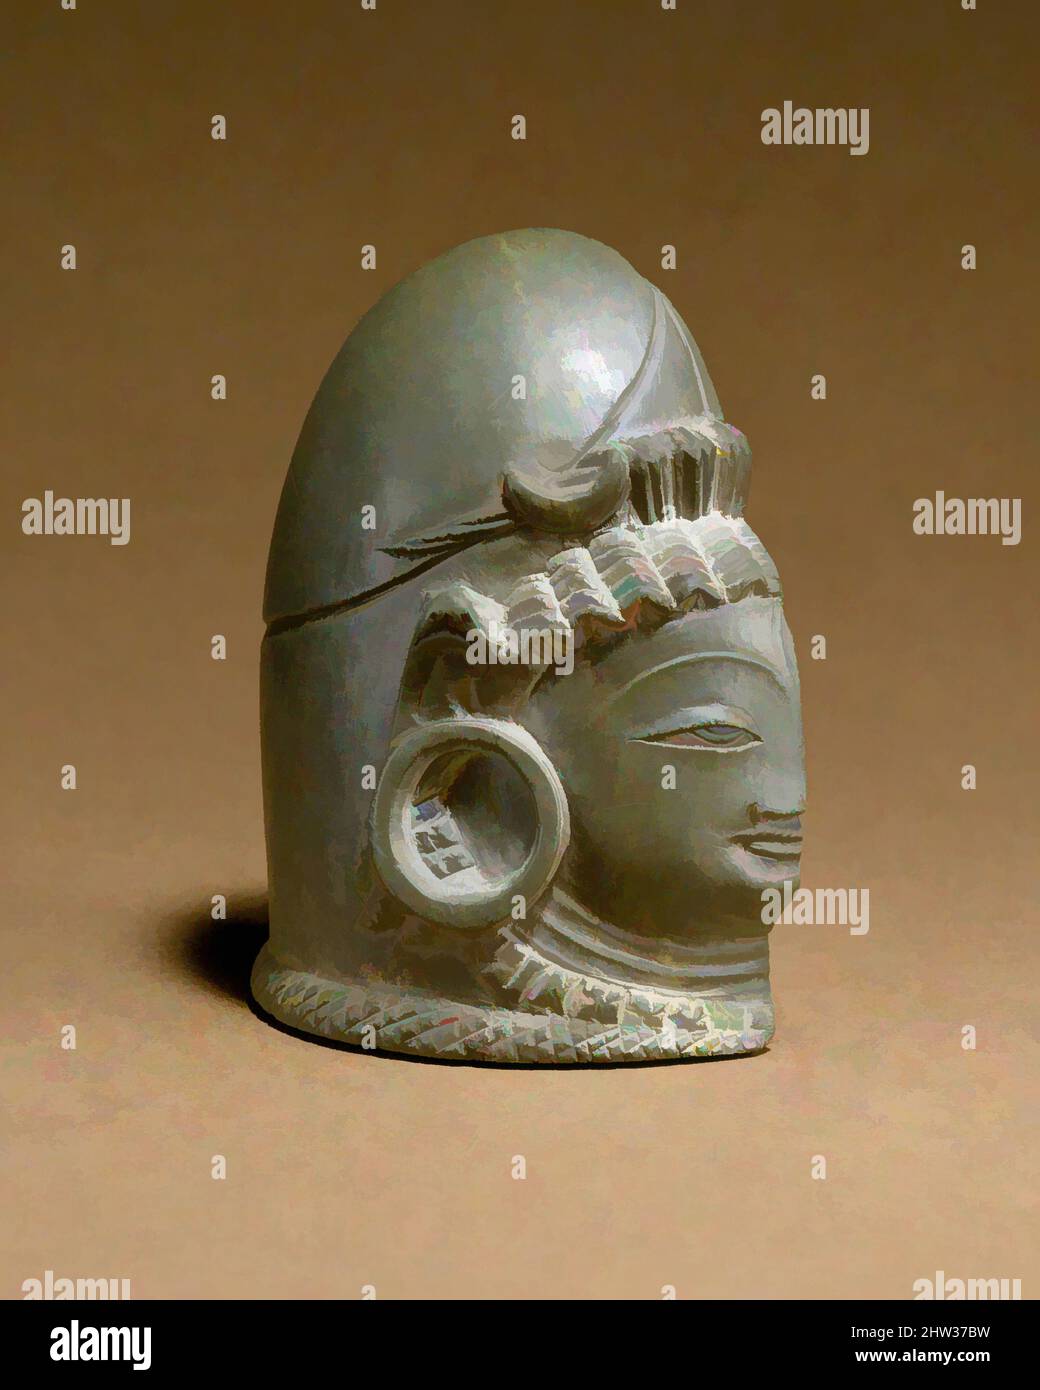 Art inspired by Section of a Diptych in Linga Form, Interior Depicting Shiva and Parvati, 7th century, India (Jammu and Kashmir, ancient kingdom of Kashmir), Chlorite schist, H. 3 in. (7.6 cm), Sculpture, Classic works modernized by Artotop with a splash of modernity. Shapes, color and value, eye-catching visual impact on art. Emotions through freedom of artworks in a contemporary way. A timeless message pursuing a wildly creative new direction. Artists turning to the digital medium and creating the Artotop NFT Stock Photo